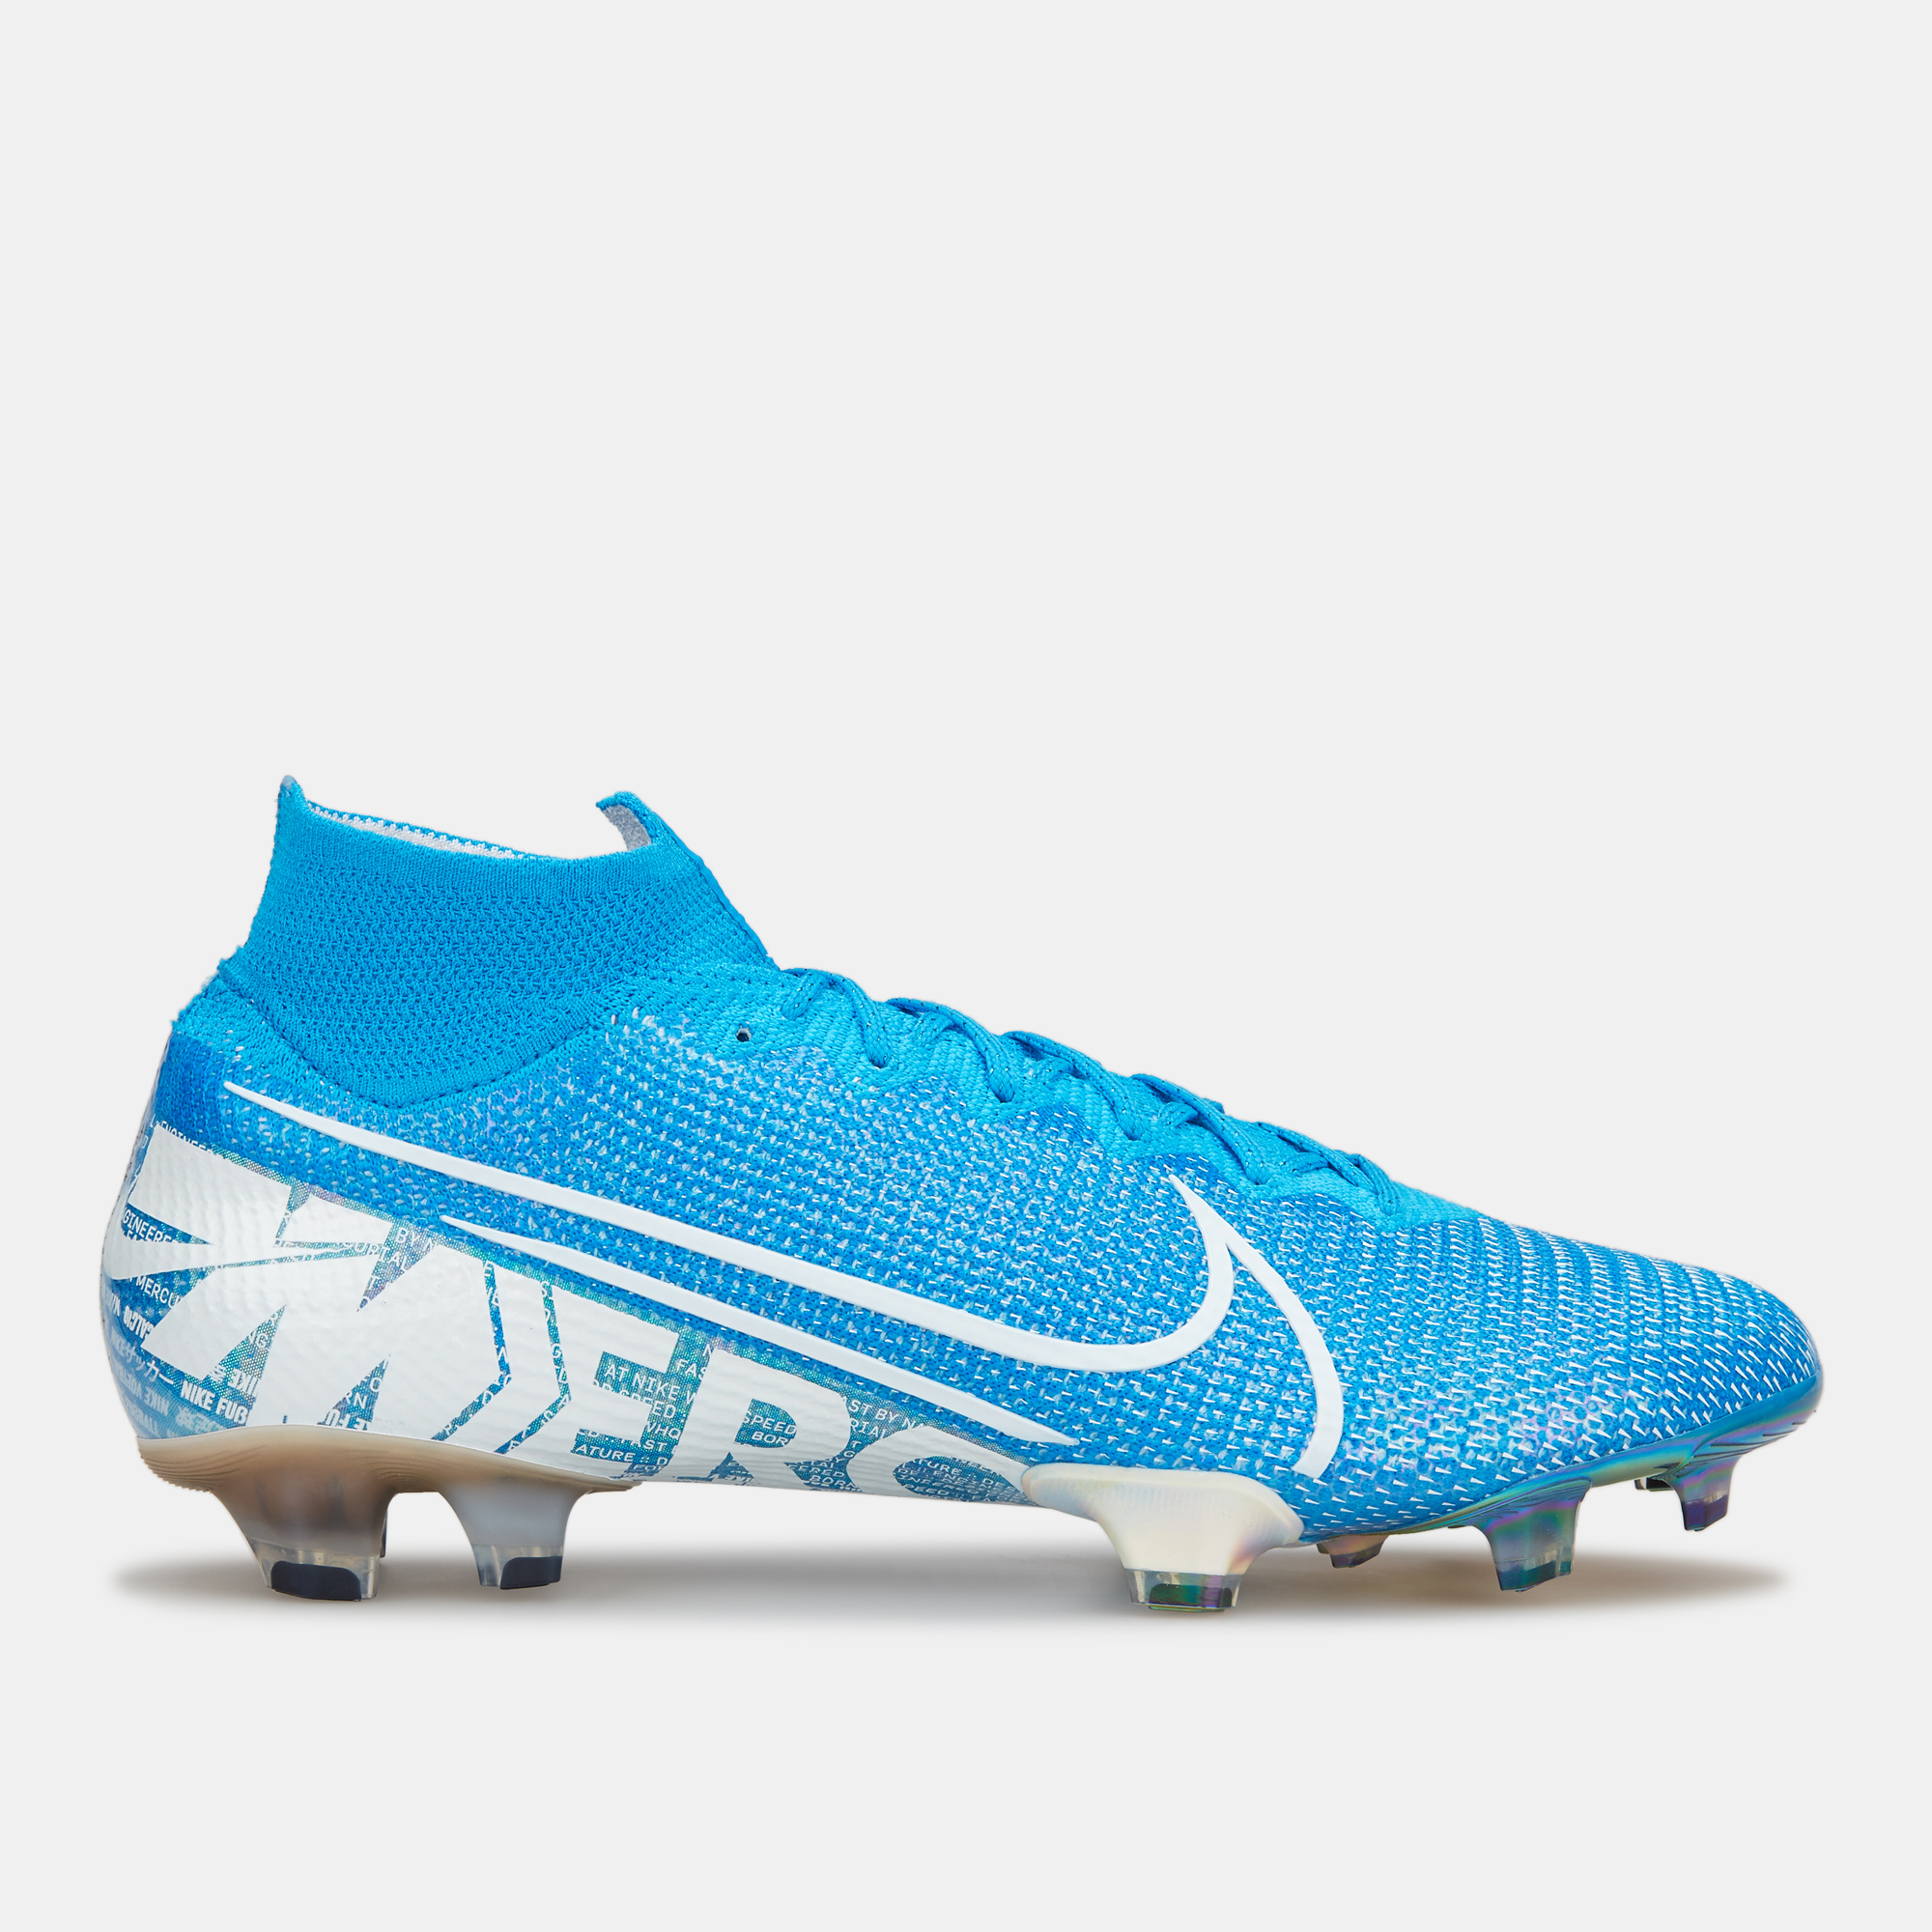 mercurial shoes price